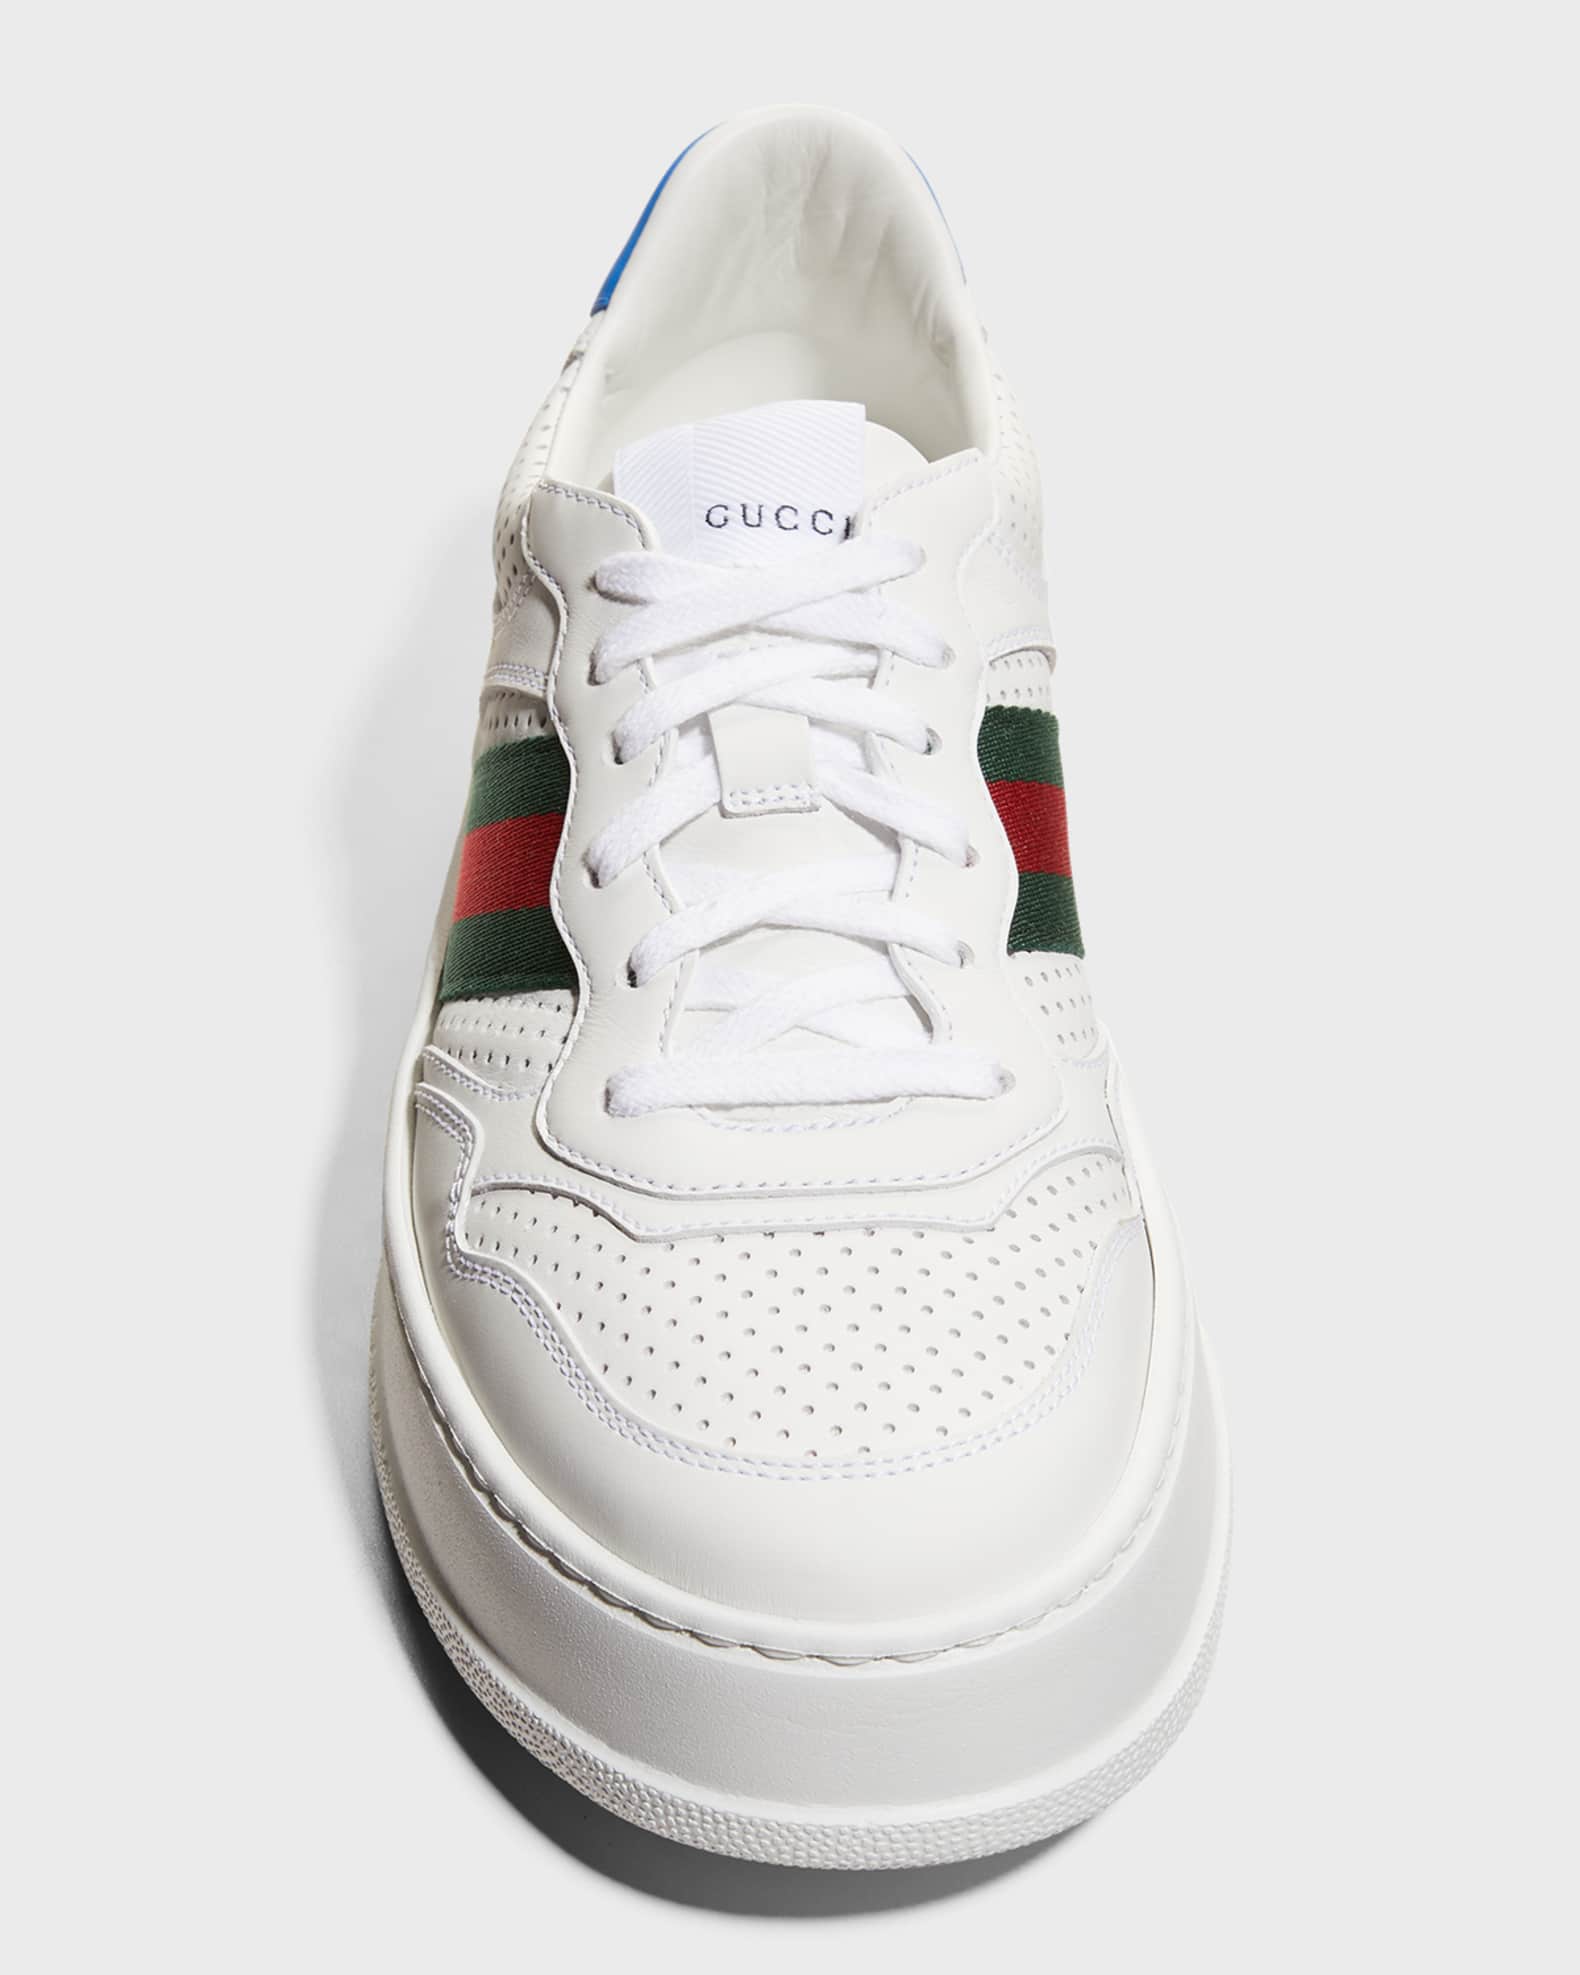 Gucci Signature Web Low-Cut Leather Sneakers | Neiman Marcus